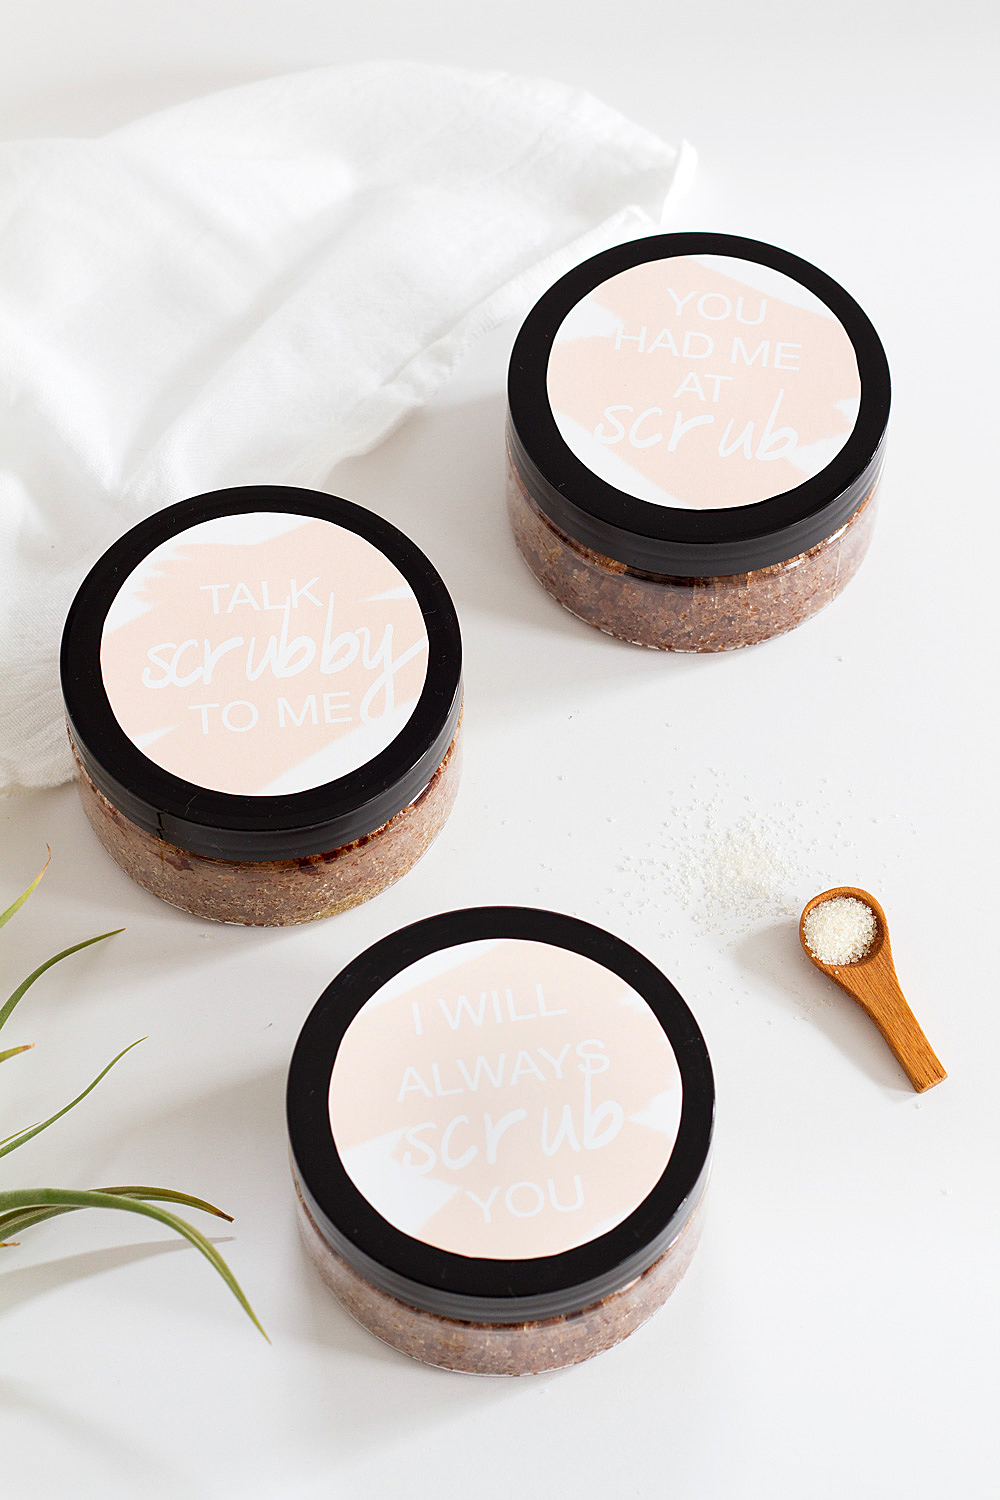 Punny Body Scrub Printables for your Galentines